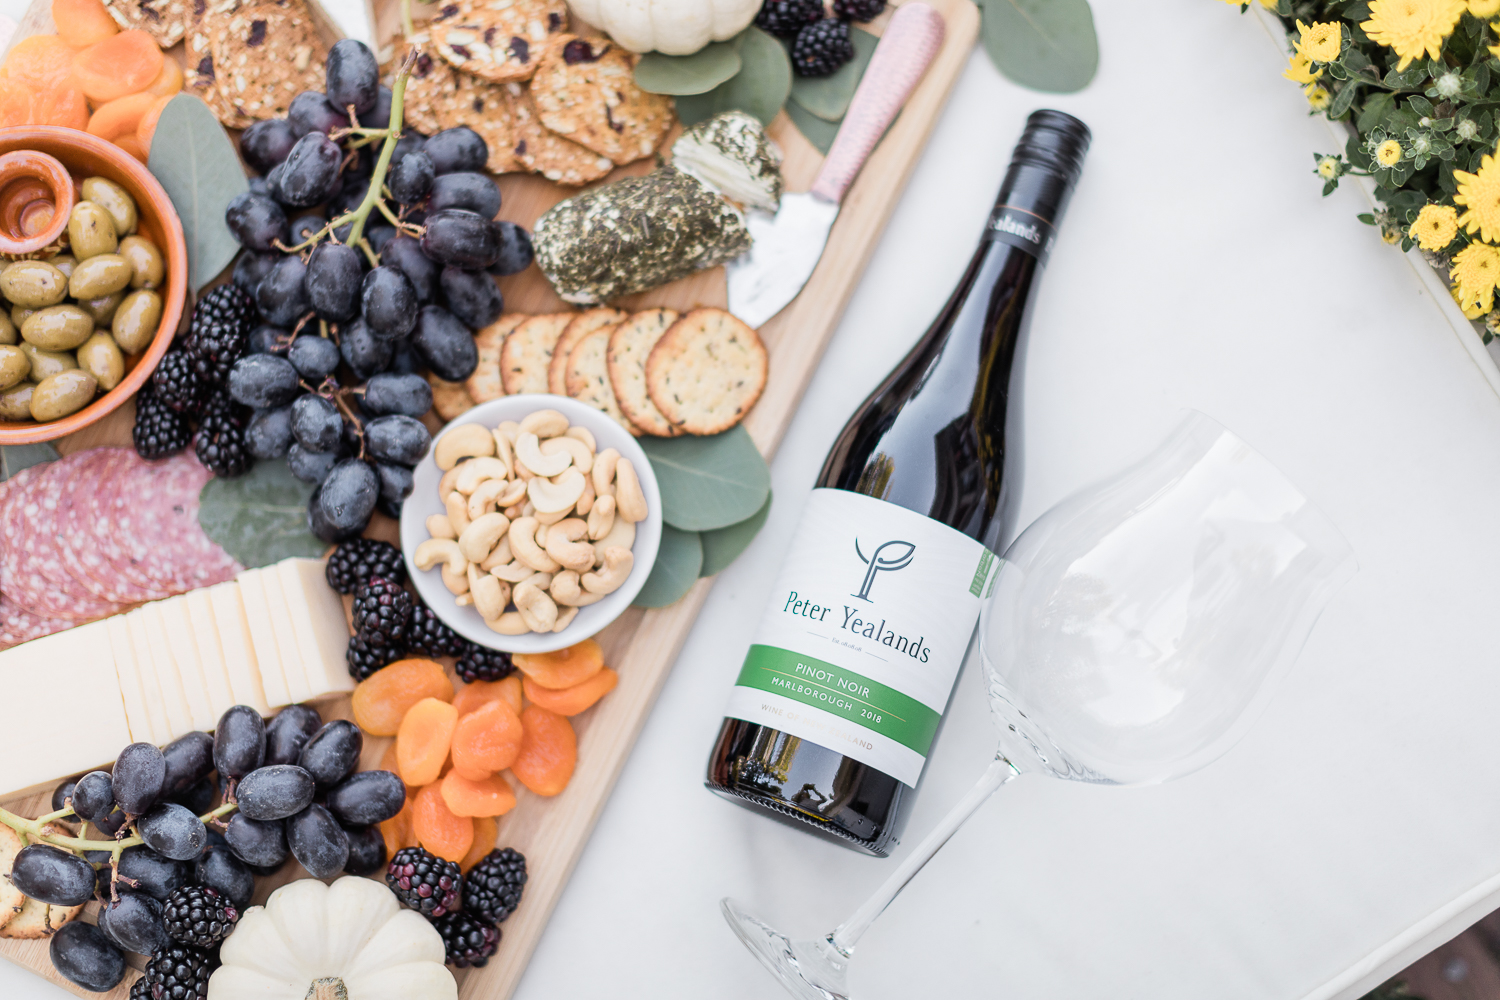 Peter Yealands Pinot Noir paired with a fall charcuterie created by blogger Stephanie Ziajka on Diary of a Debutante